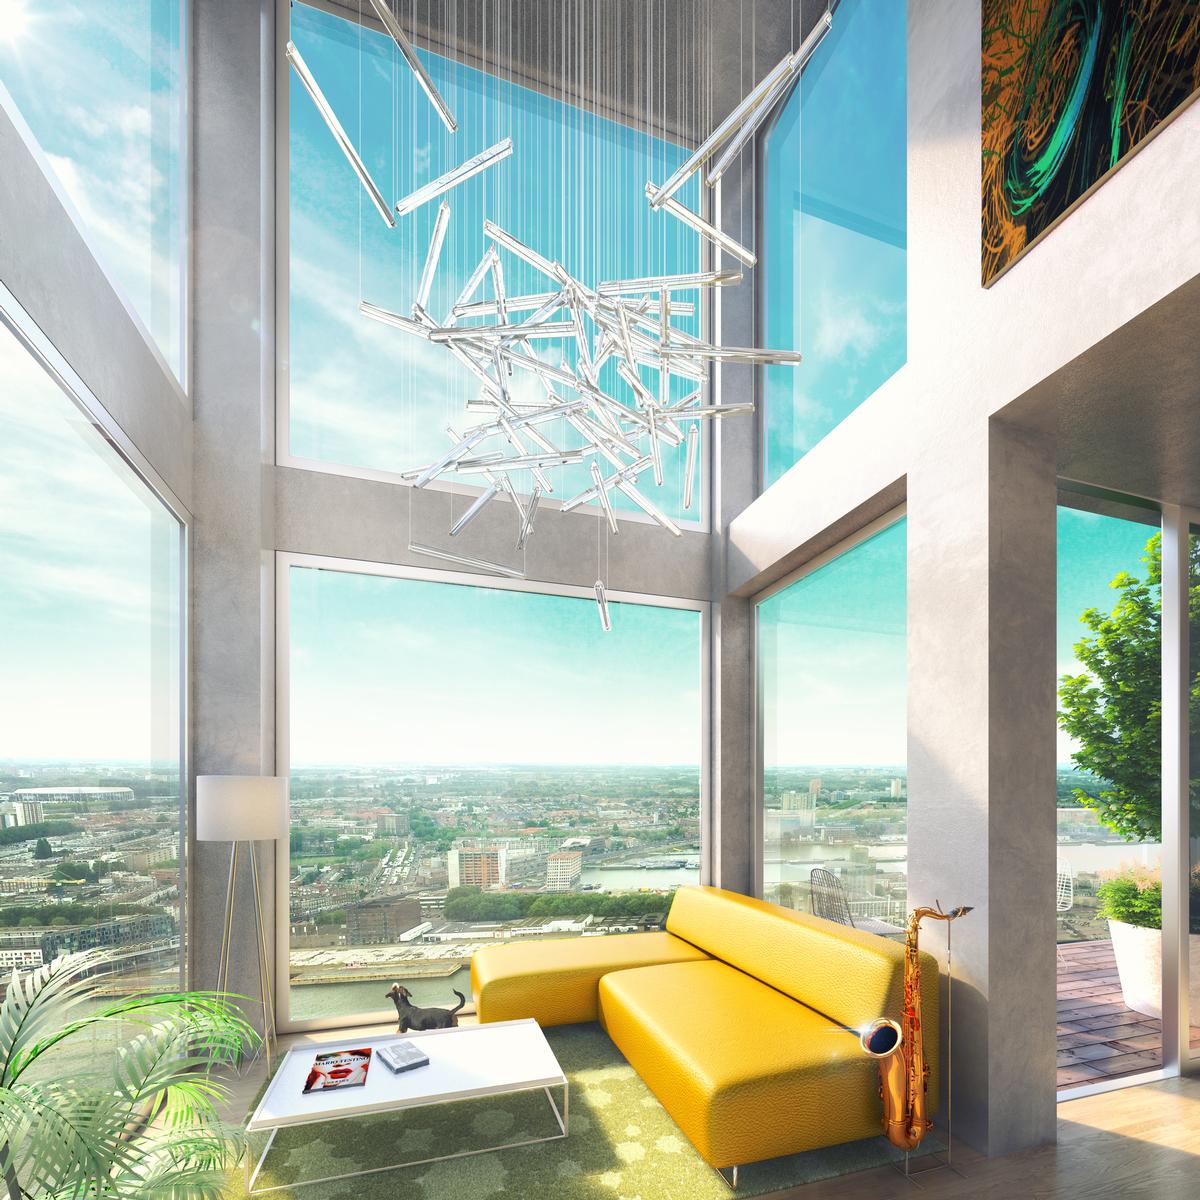 Inside The Sax, all the apartments have 270-degree panoramic views of the River Maas and the city beyond / MVRDV